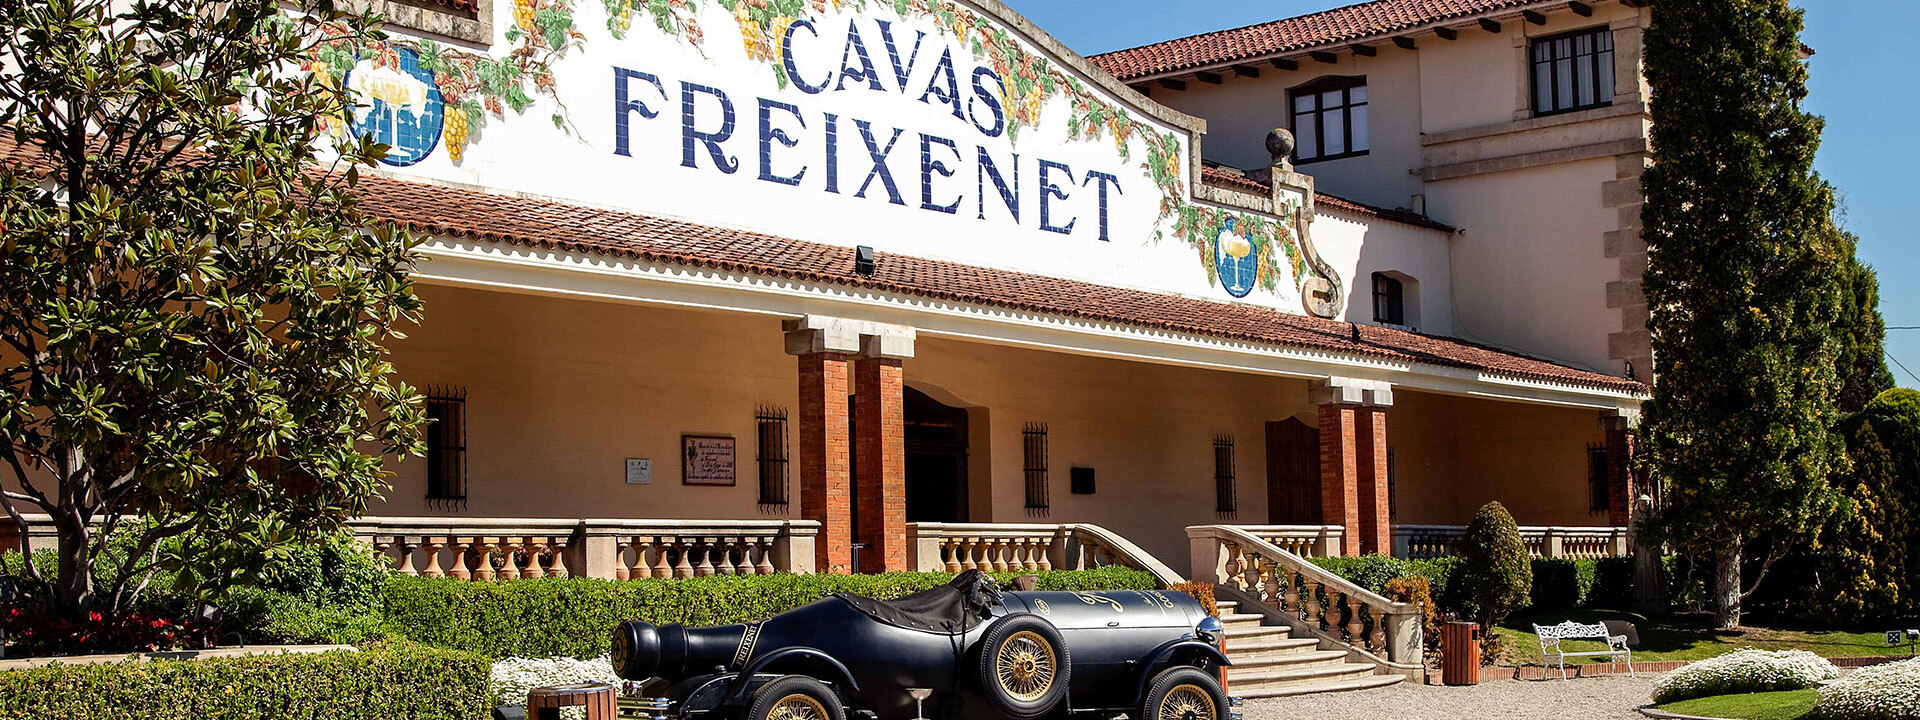 Facade of Freixenet Cava headquarters, a white building with a red roof. In front of it is a car made to look like it is made of a large black wine bottle.